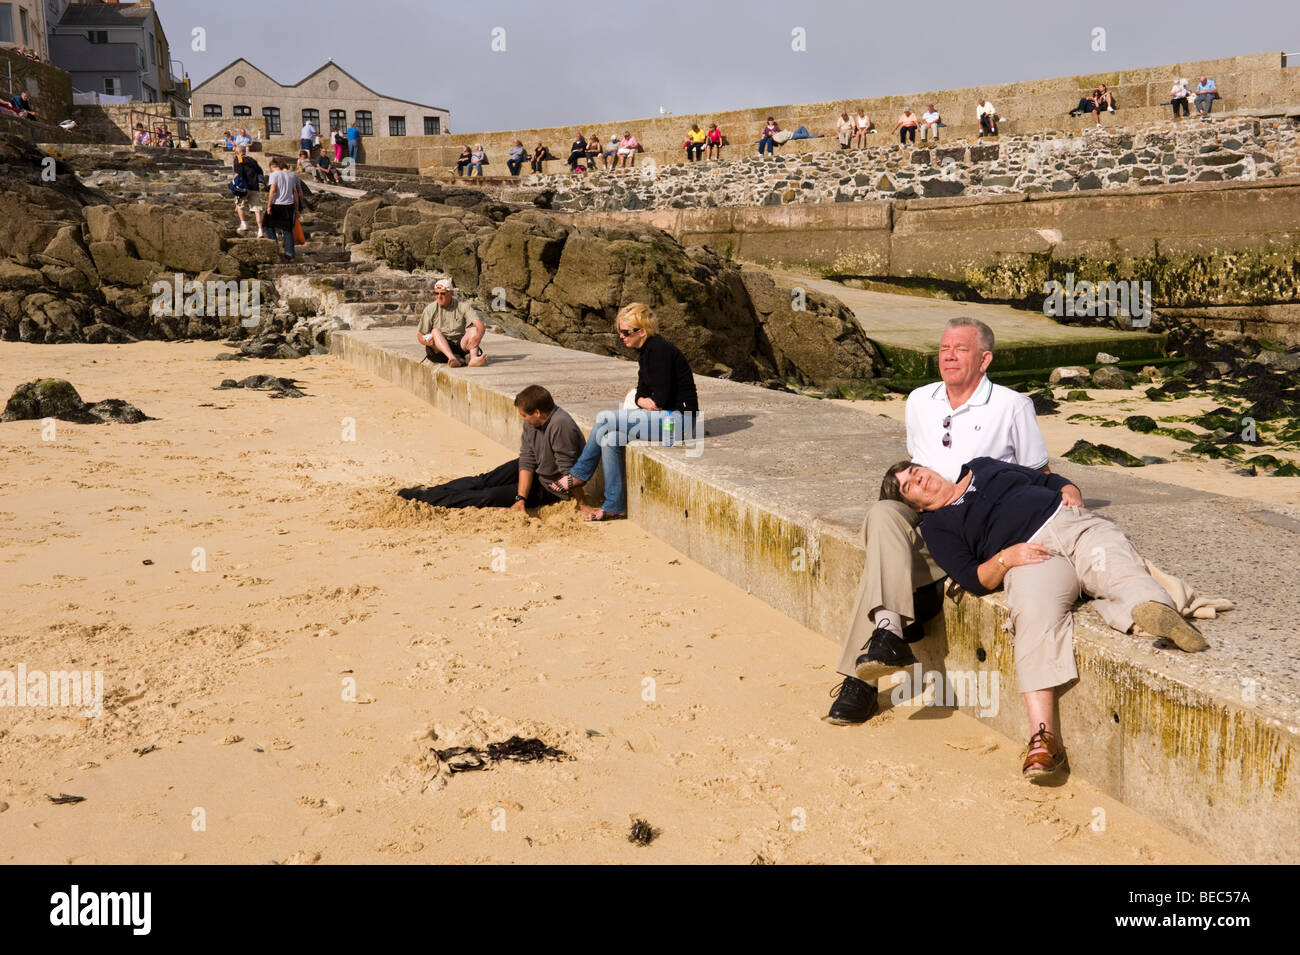 Tourists visitors and people relaxing and sunbathing on the beach at St Ives, Cornwall, UK Stock Photo